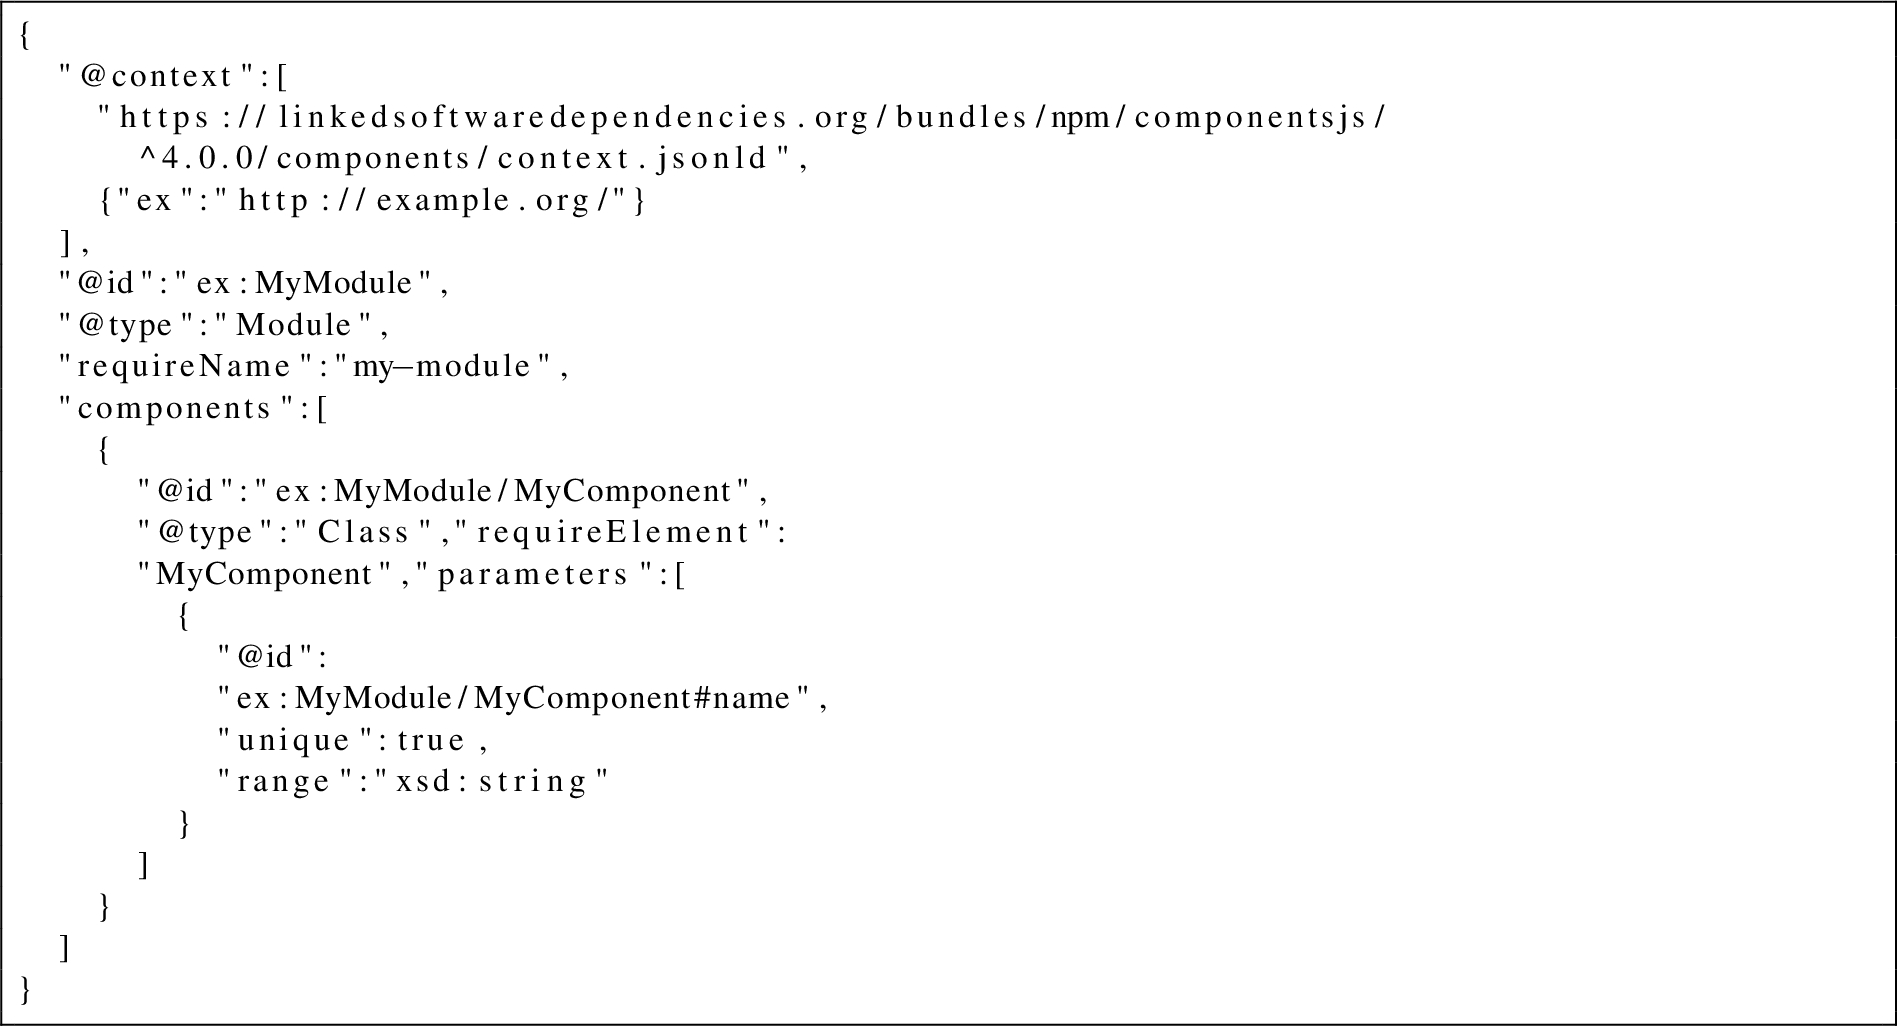 A description of a module ex:MyModule with a single component using the JSON-LD serialization, compacted with the https://linkedsoftwaredependencies.org/bundles/npm/componentsjs/^4.0.0/components/context.jsonld context.